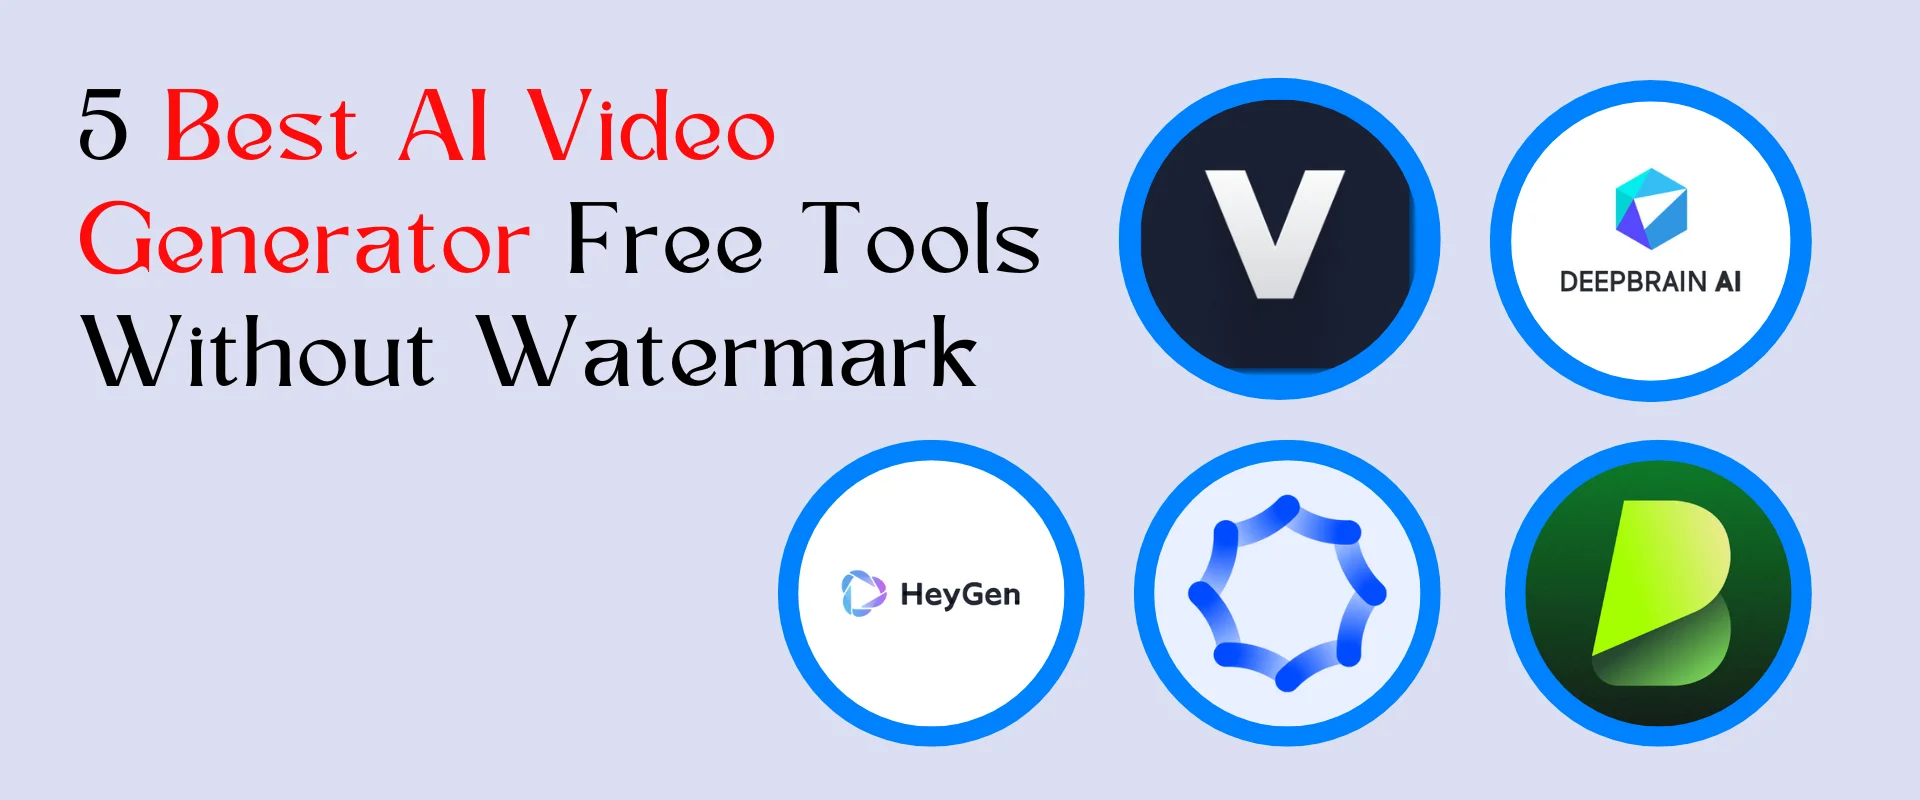 5 Best AI Video Generator Free Tools Without Watermark